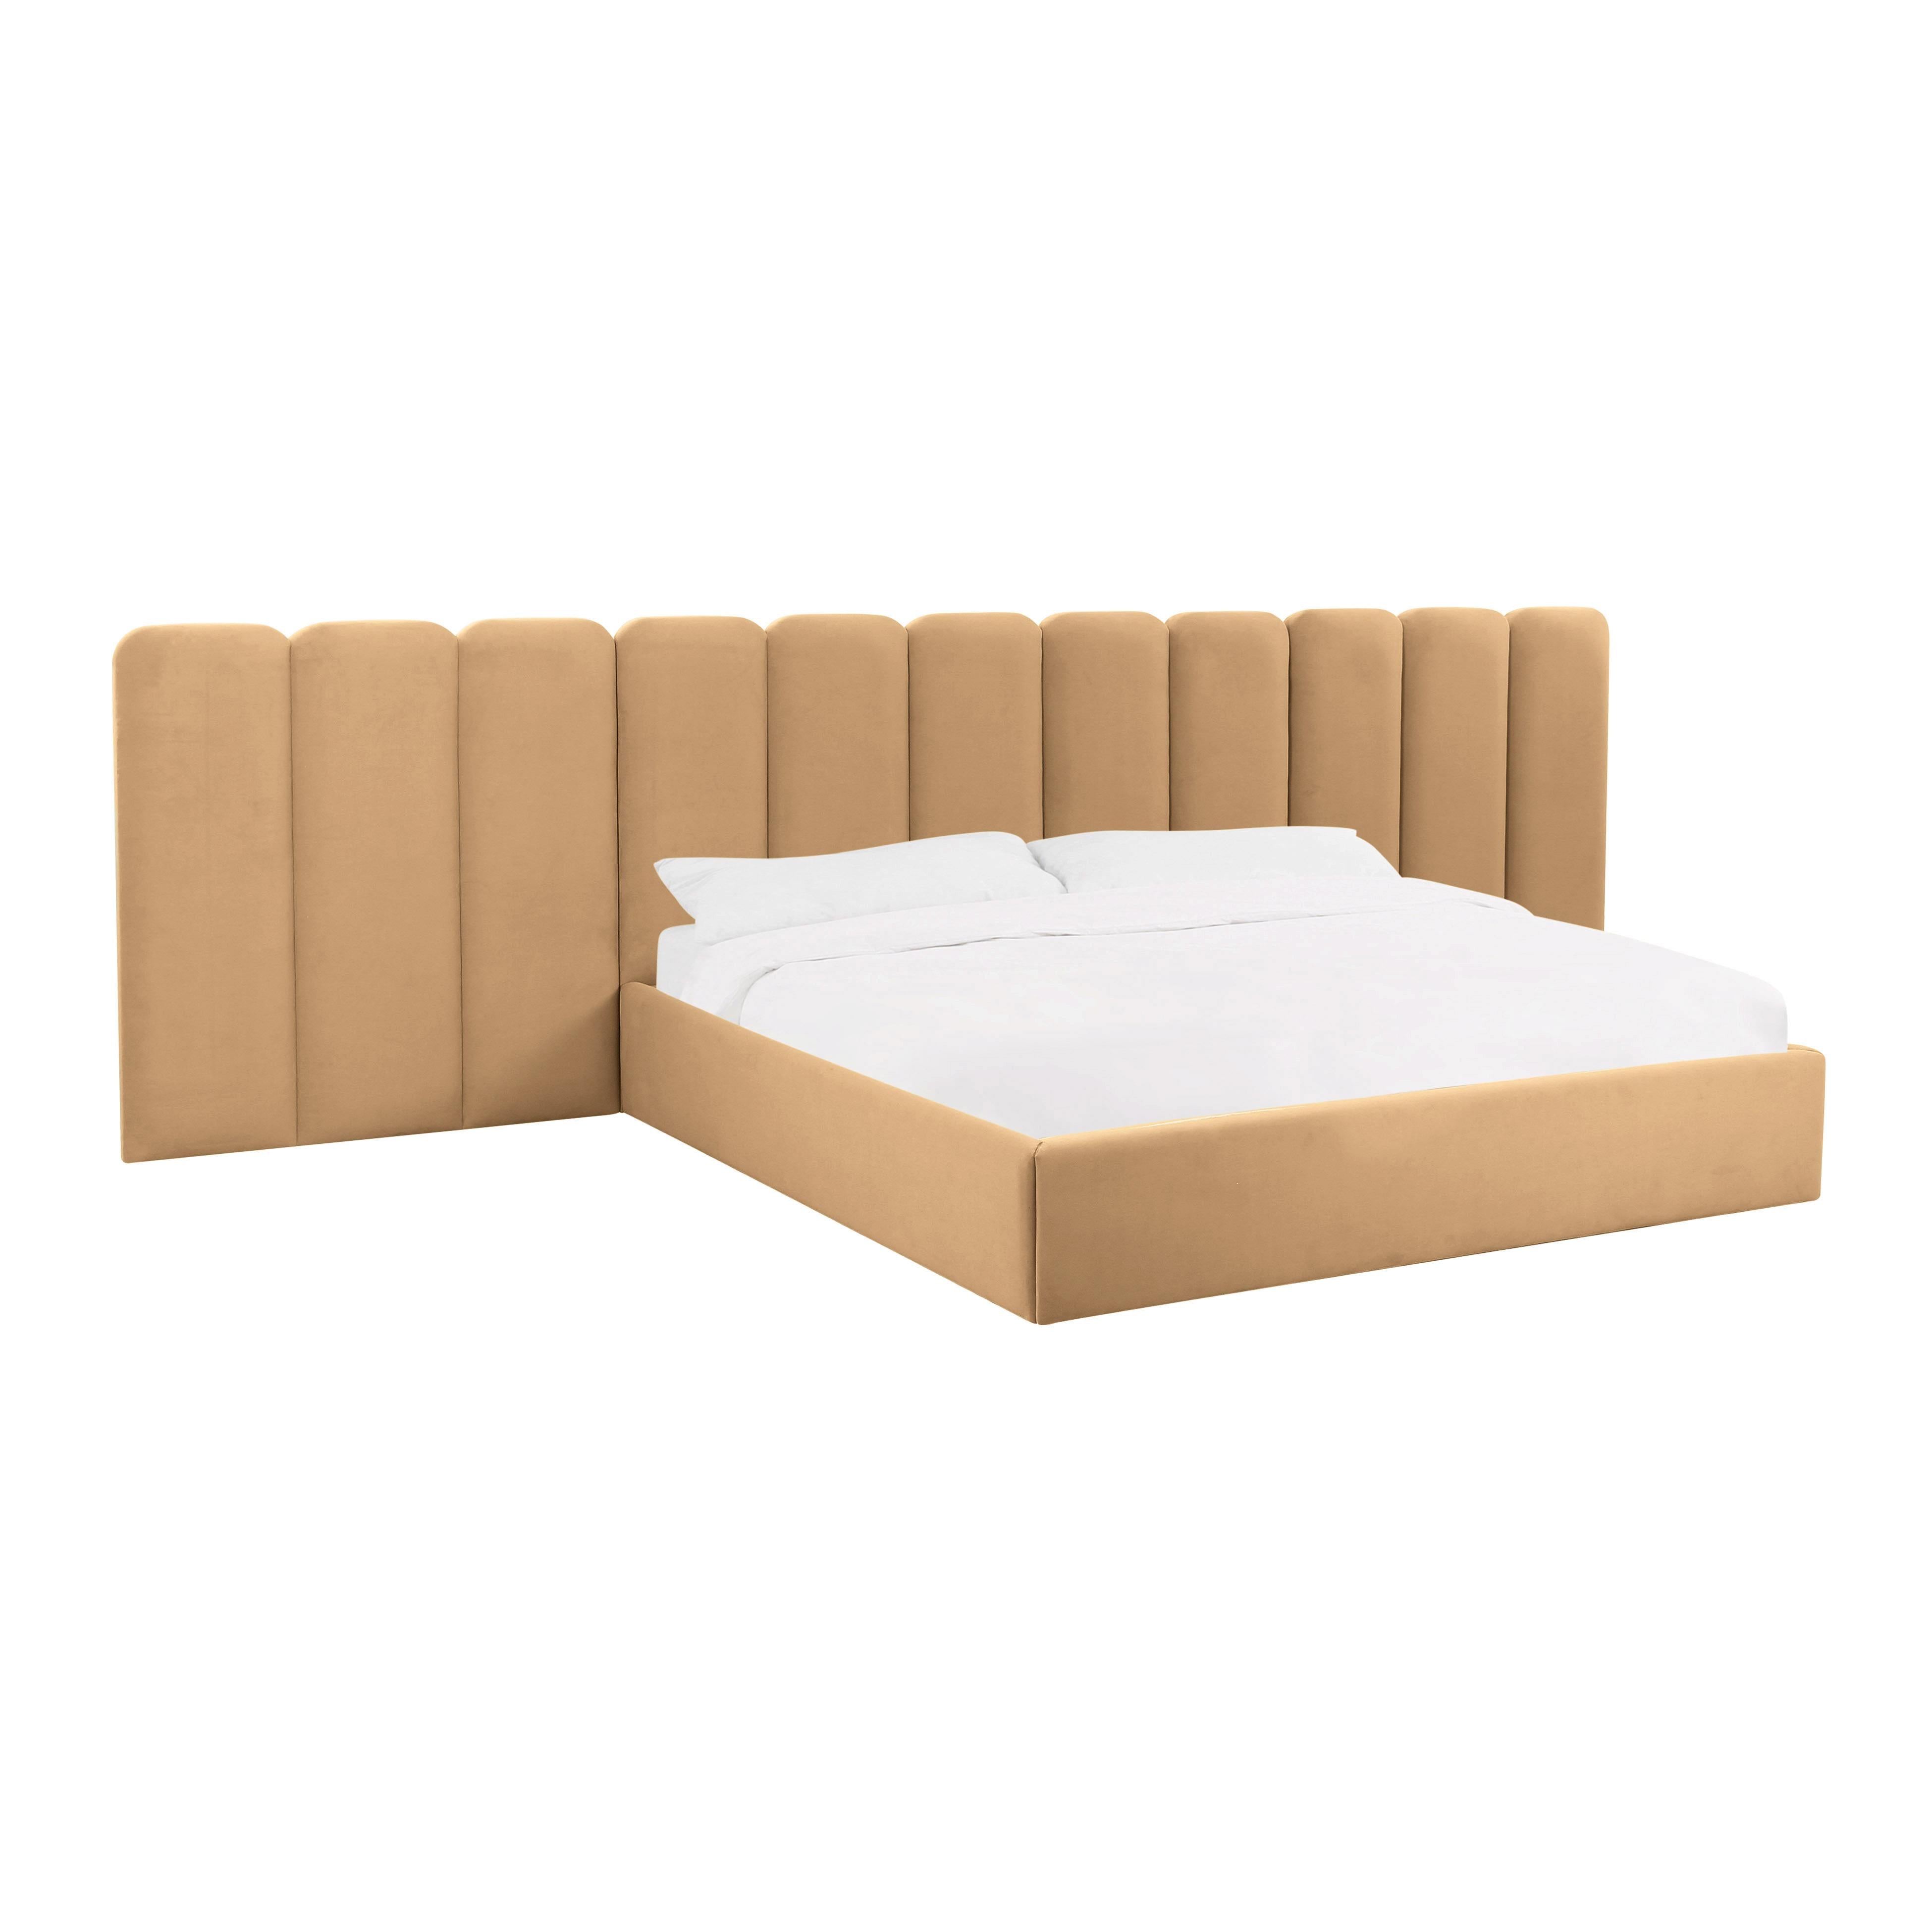 Tov Furniture Beds - Palani Honey Velvet King Bed with Wings